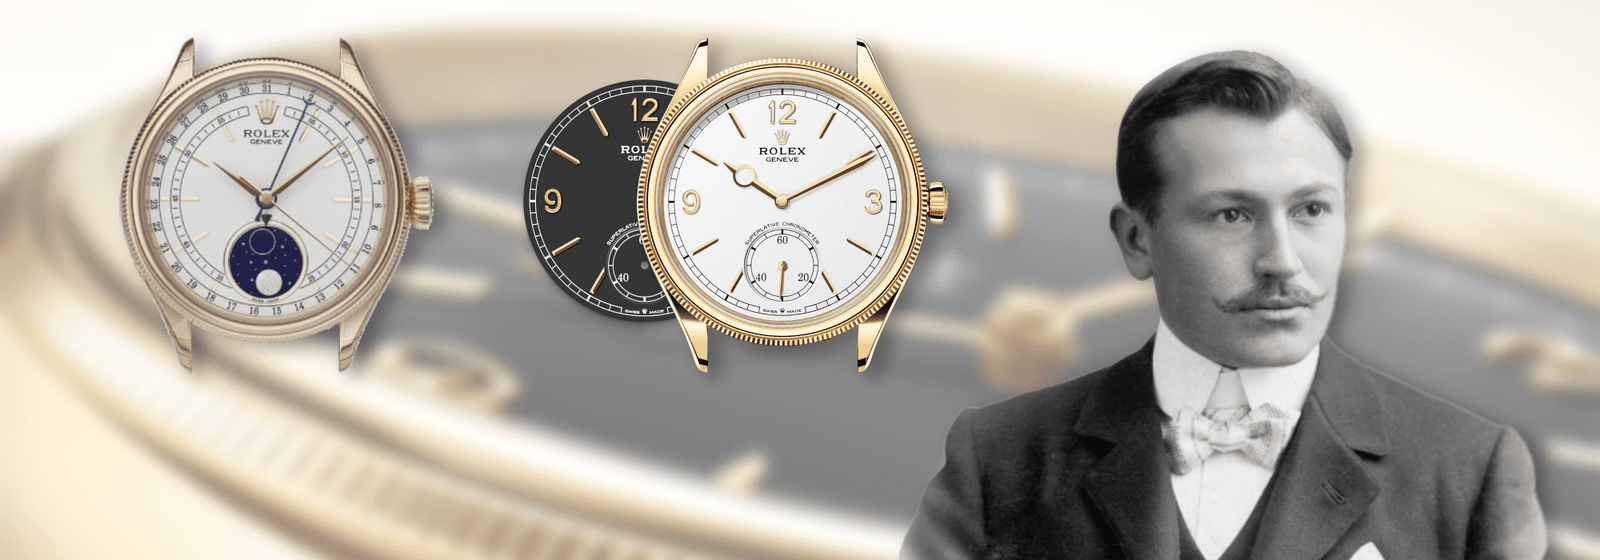 Rolex Dress Watches: A Subtle Evolution From Cellini To The Perpetual 1908